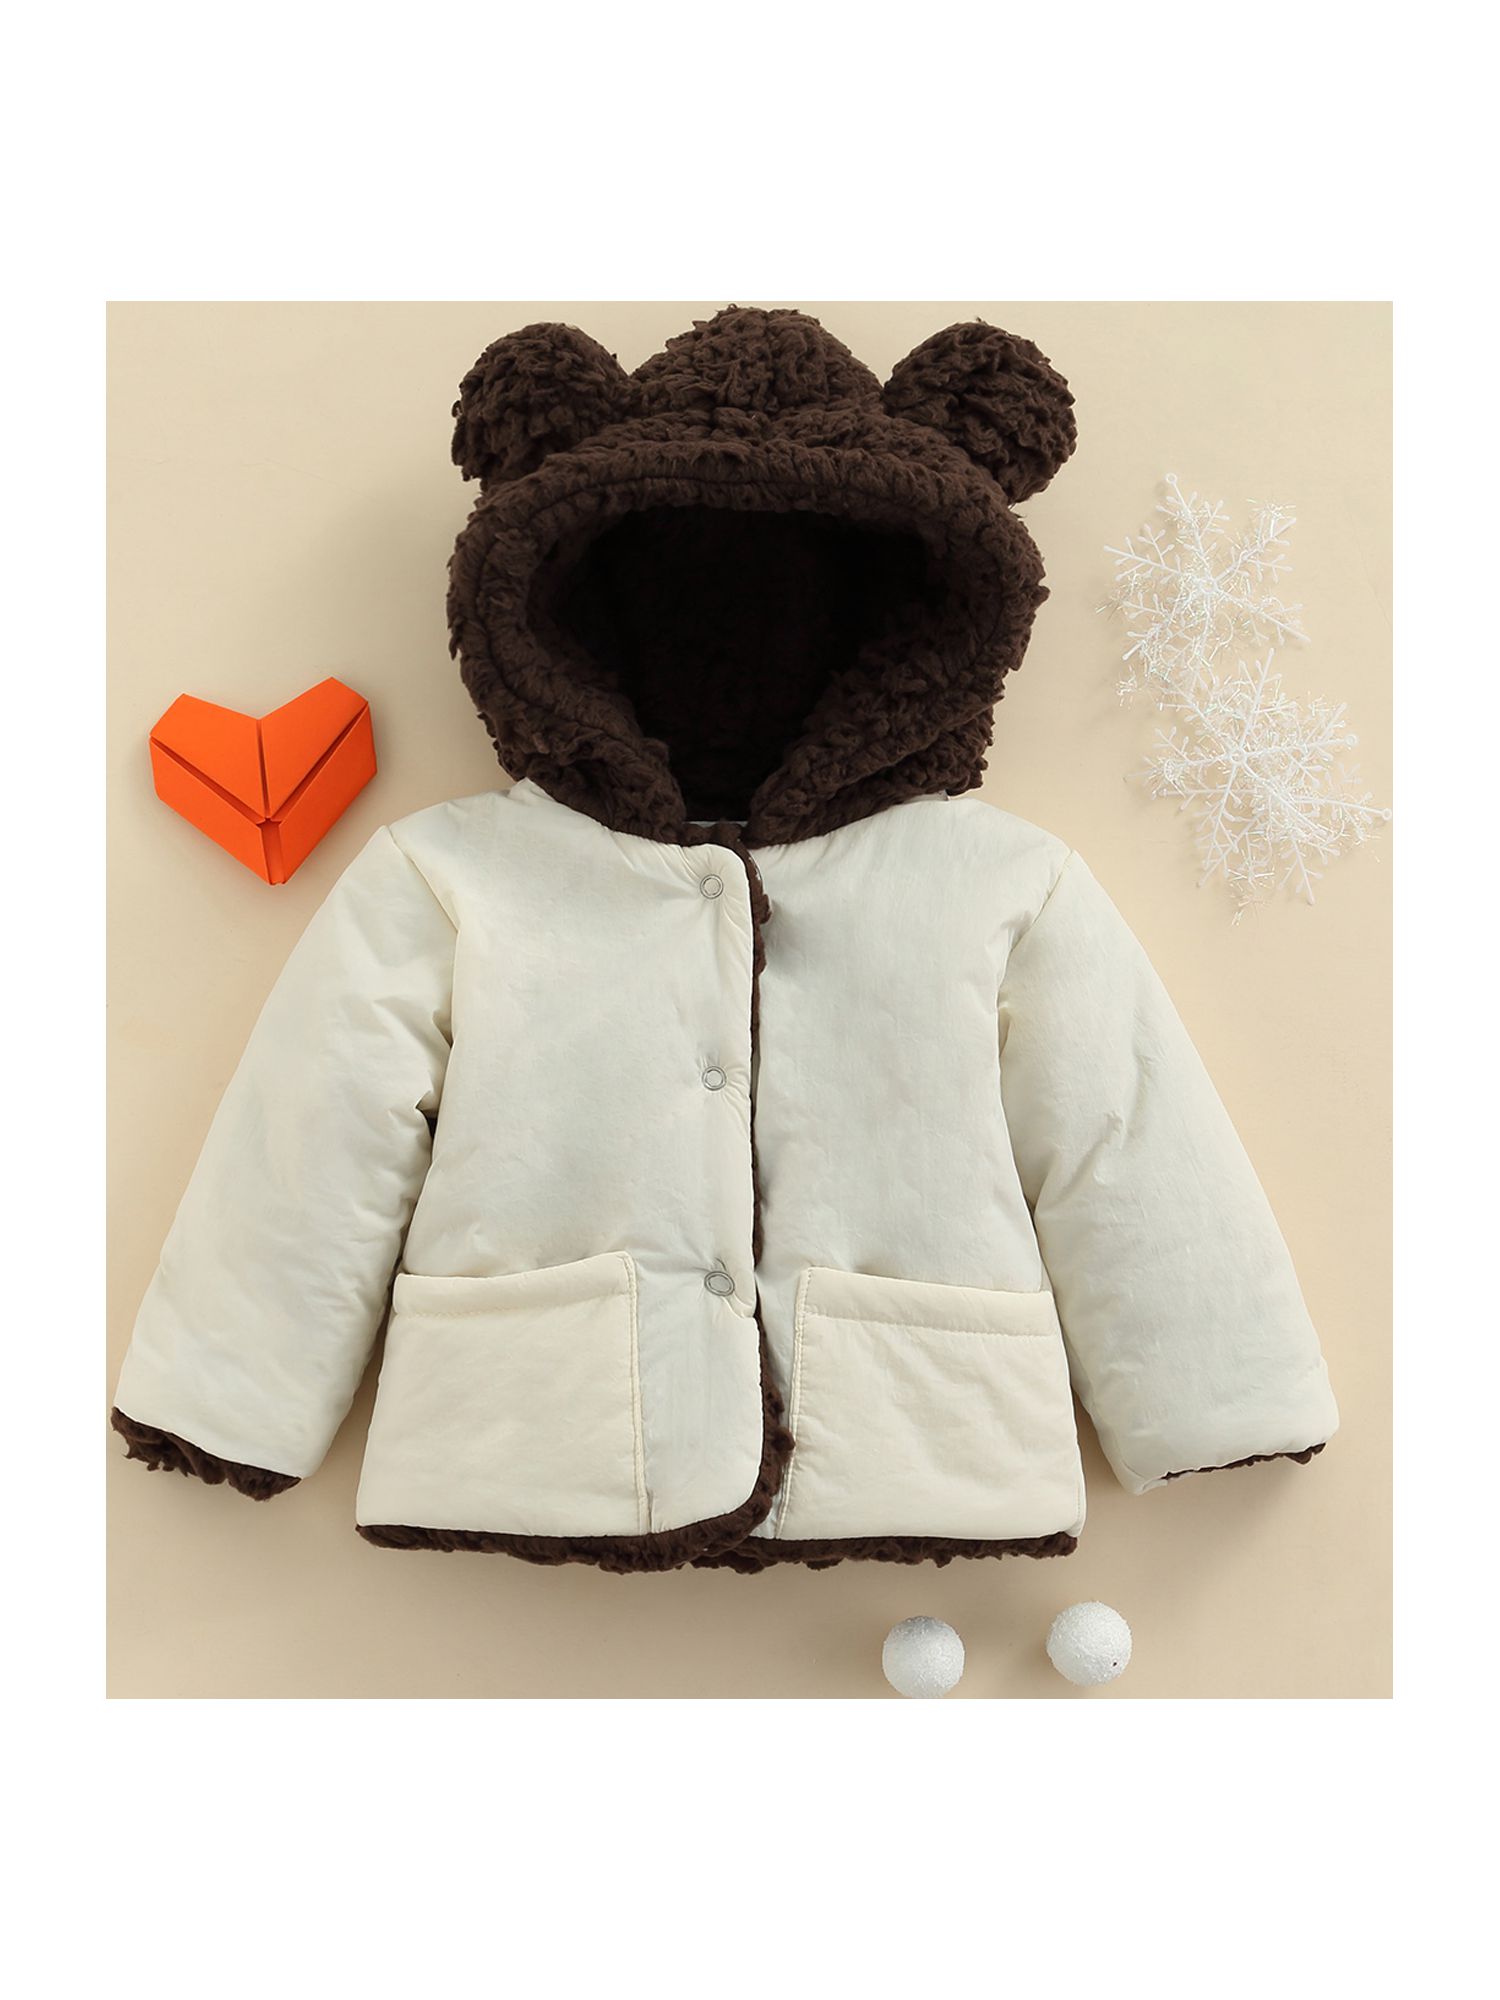 Qiylii Baby Winter Hooded Coat, Long Sleeve Button-down Wadded Jacket - image 2 of 8